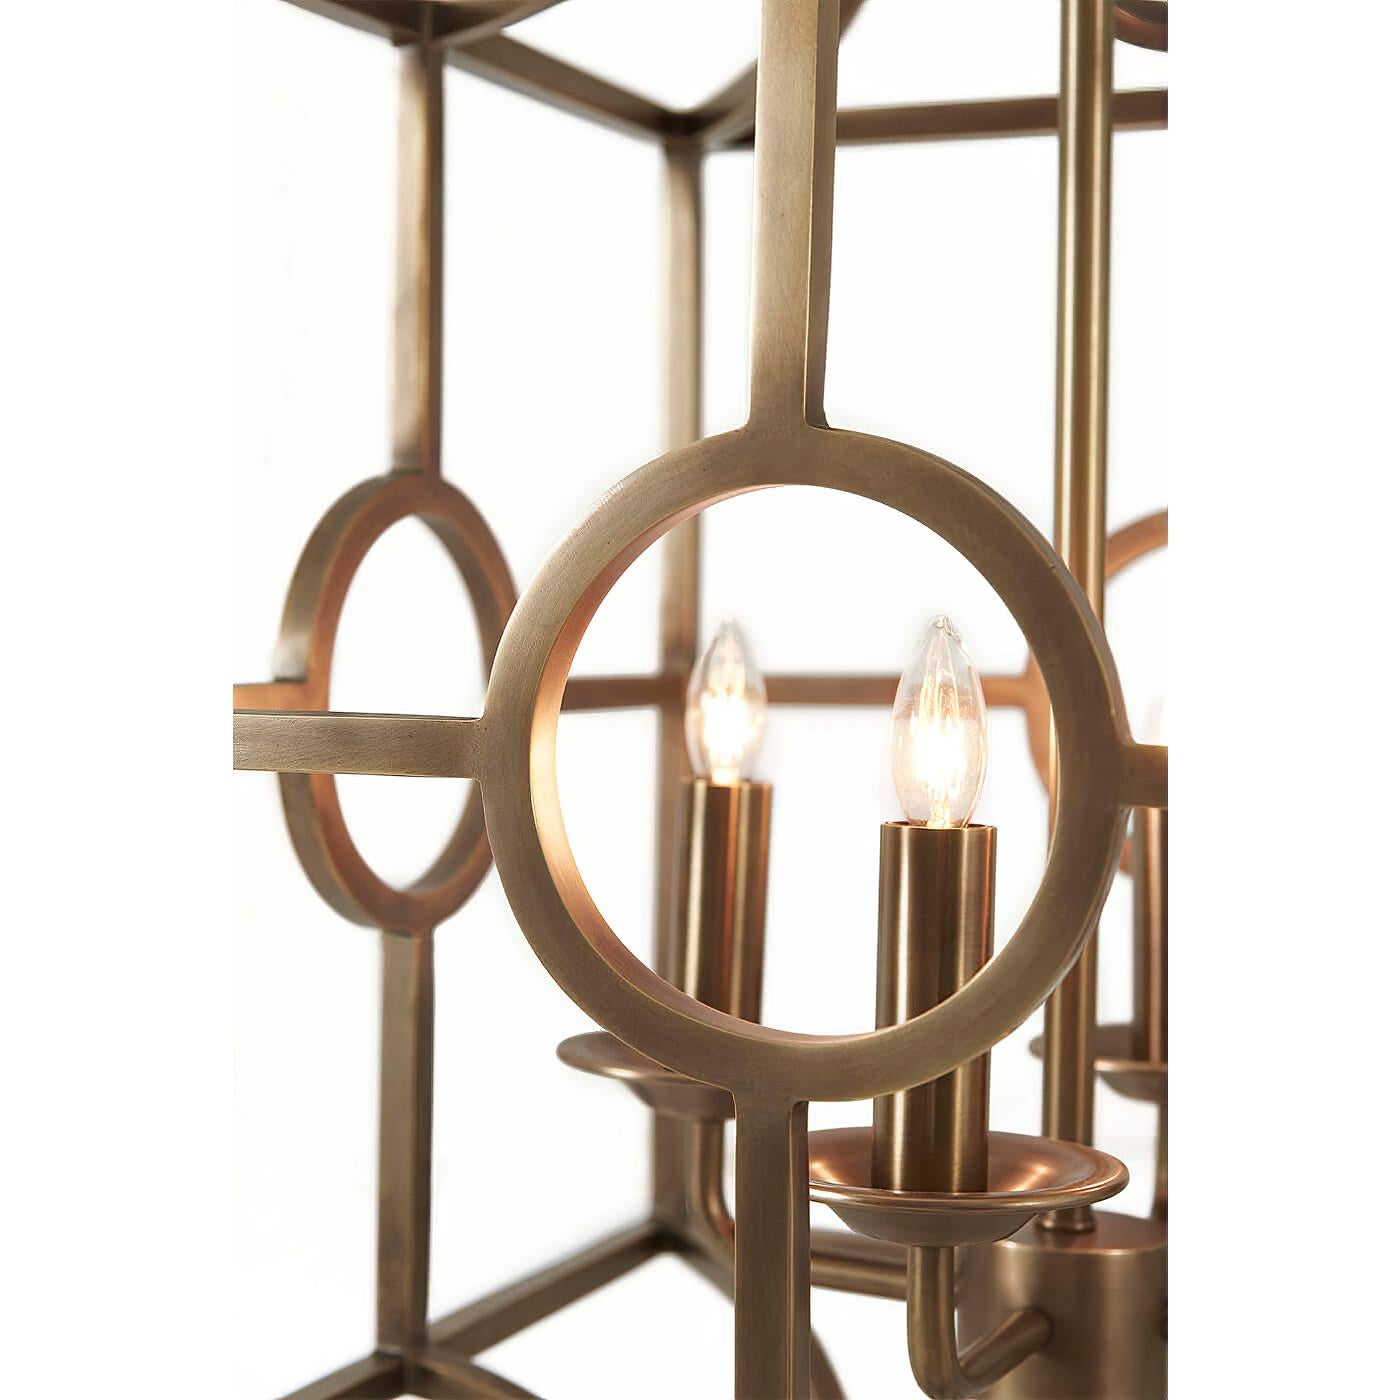 Midcentury style brass finished steel four-light lantern cage pagoda form chandelier.

Dimensions: 18